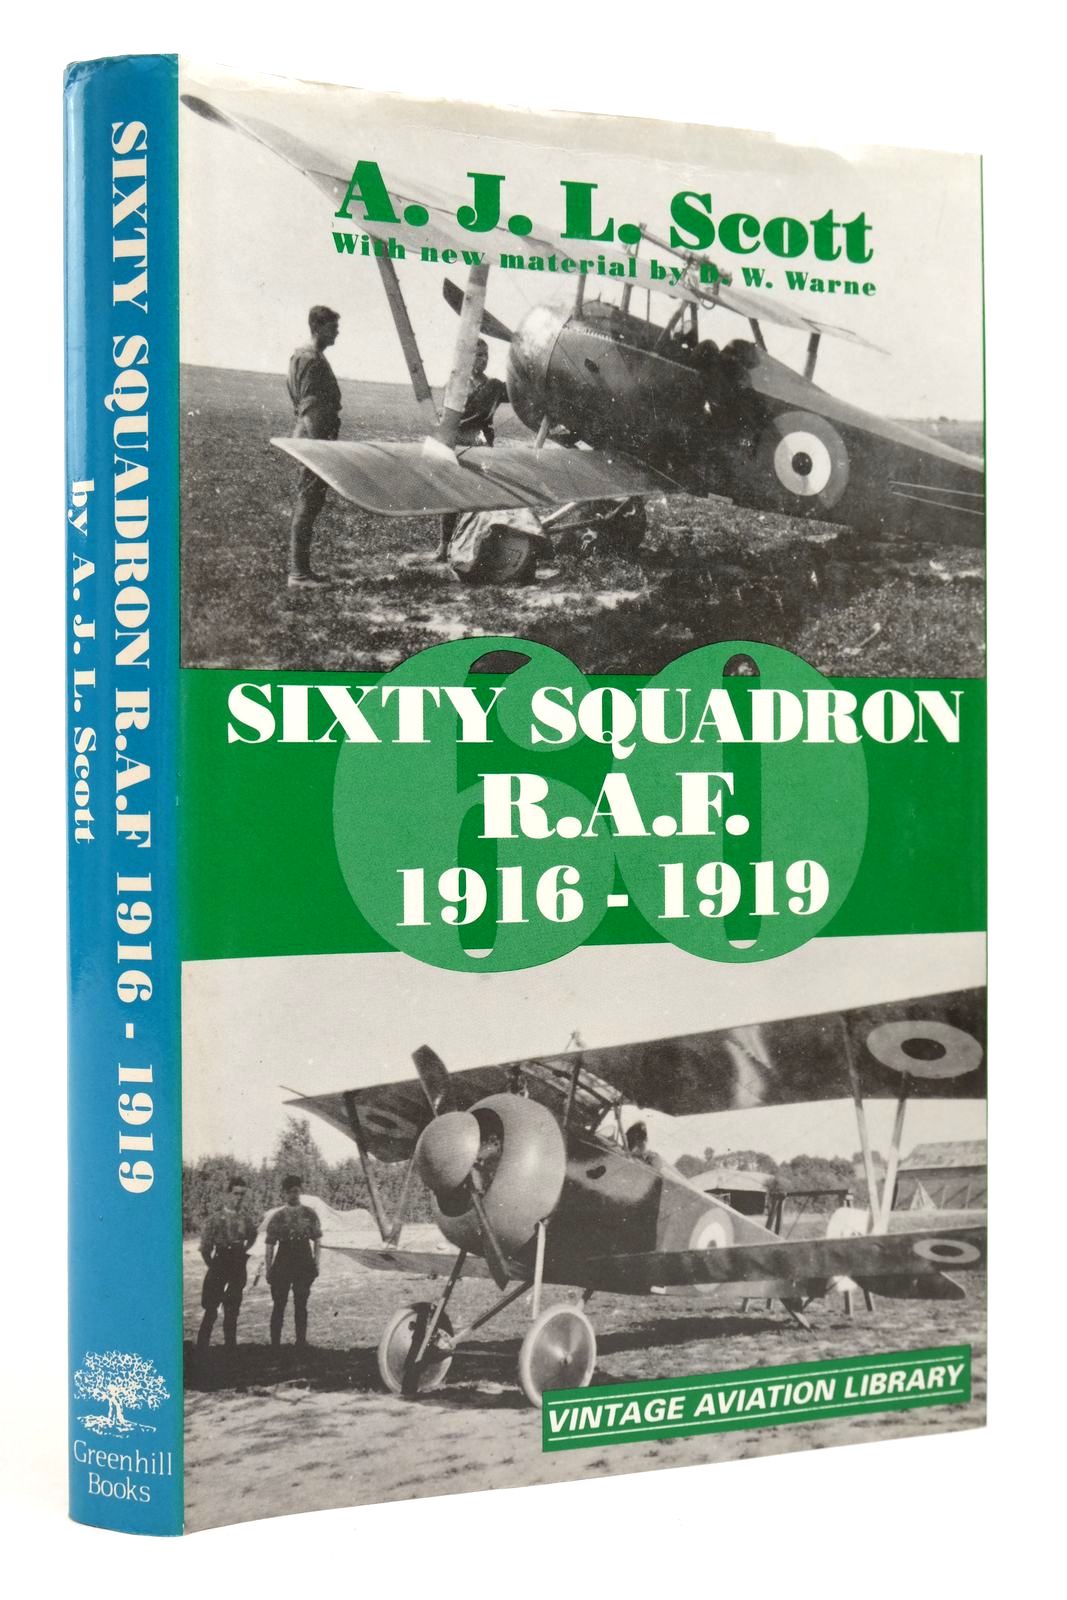 Photo of SIXTY SQUADRON R.A.F.: A HISTORY OF THE SQUADRON 1916 - 1919- Stock Number: 2139817